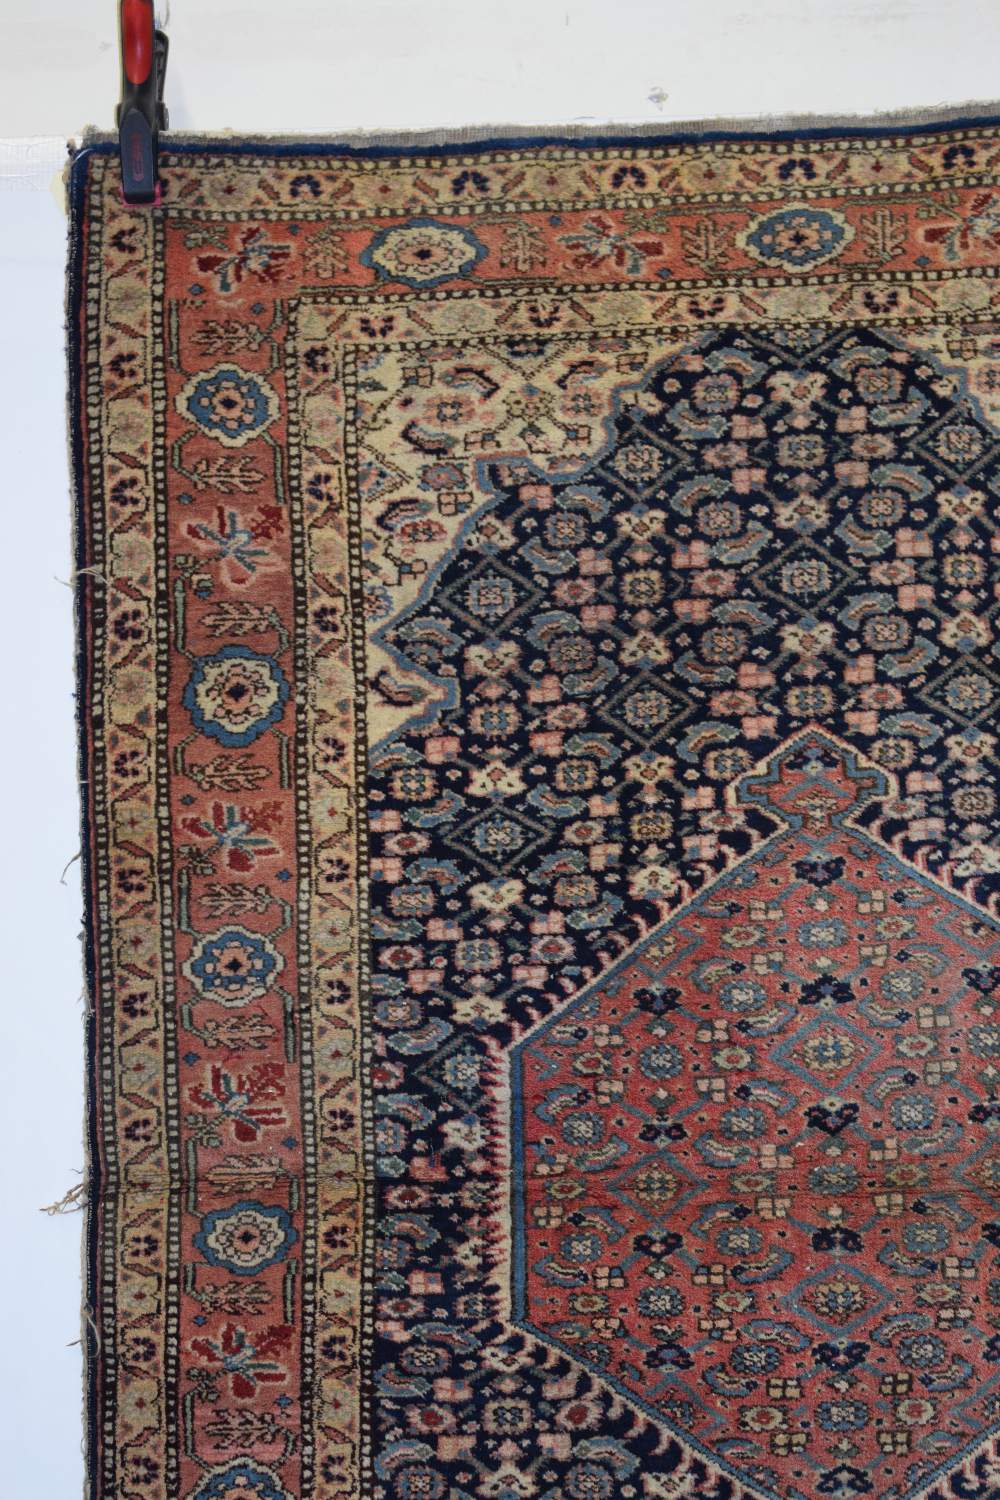 North west Persian rug, Ardabil or Tabriz district, circa 1950s, 5ft. 2in. X 3ft. 7in. 1.58m. X 1. - Image 4 of 8